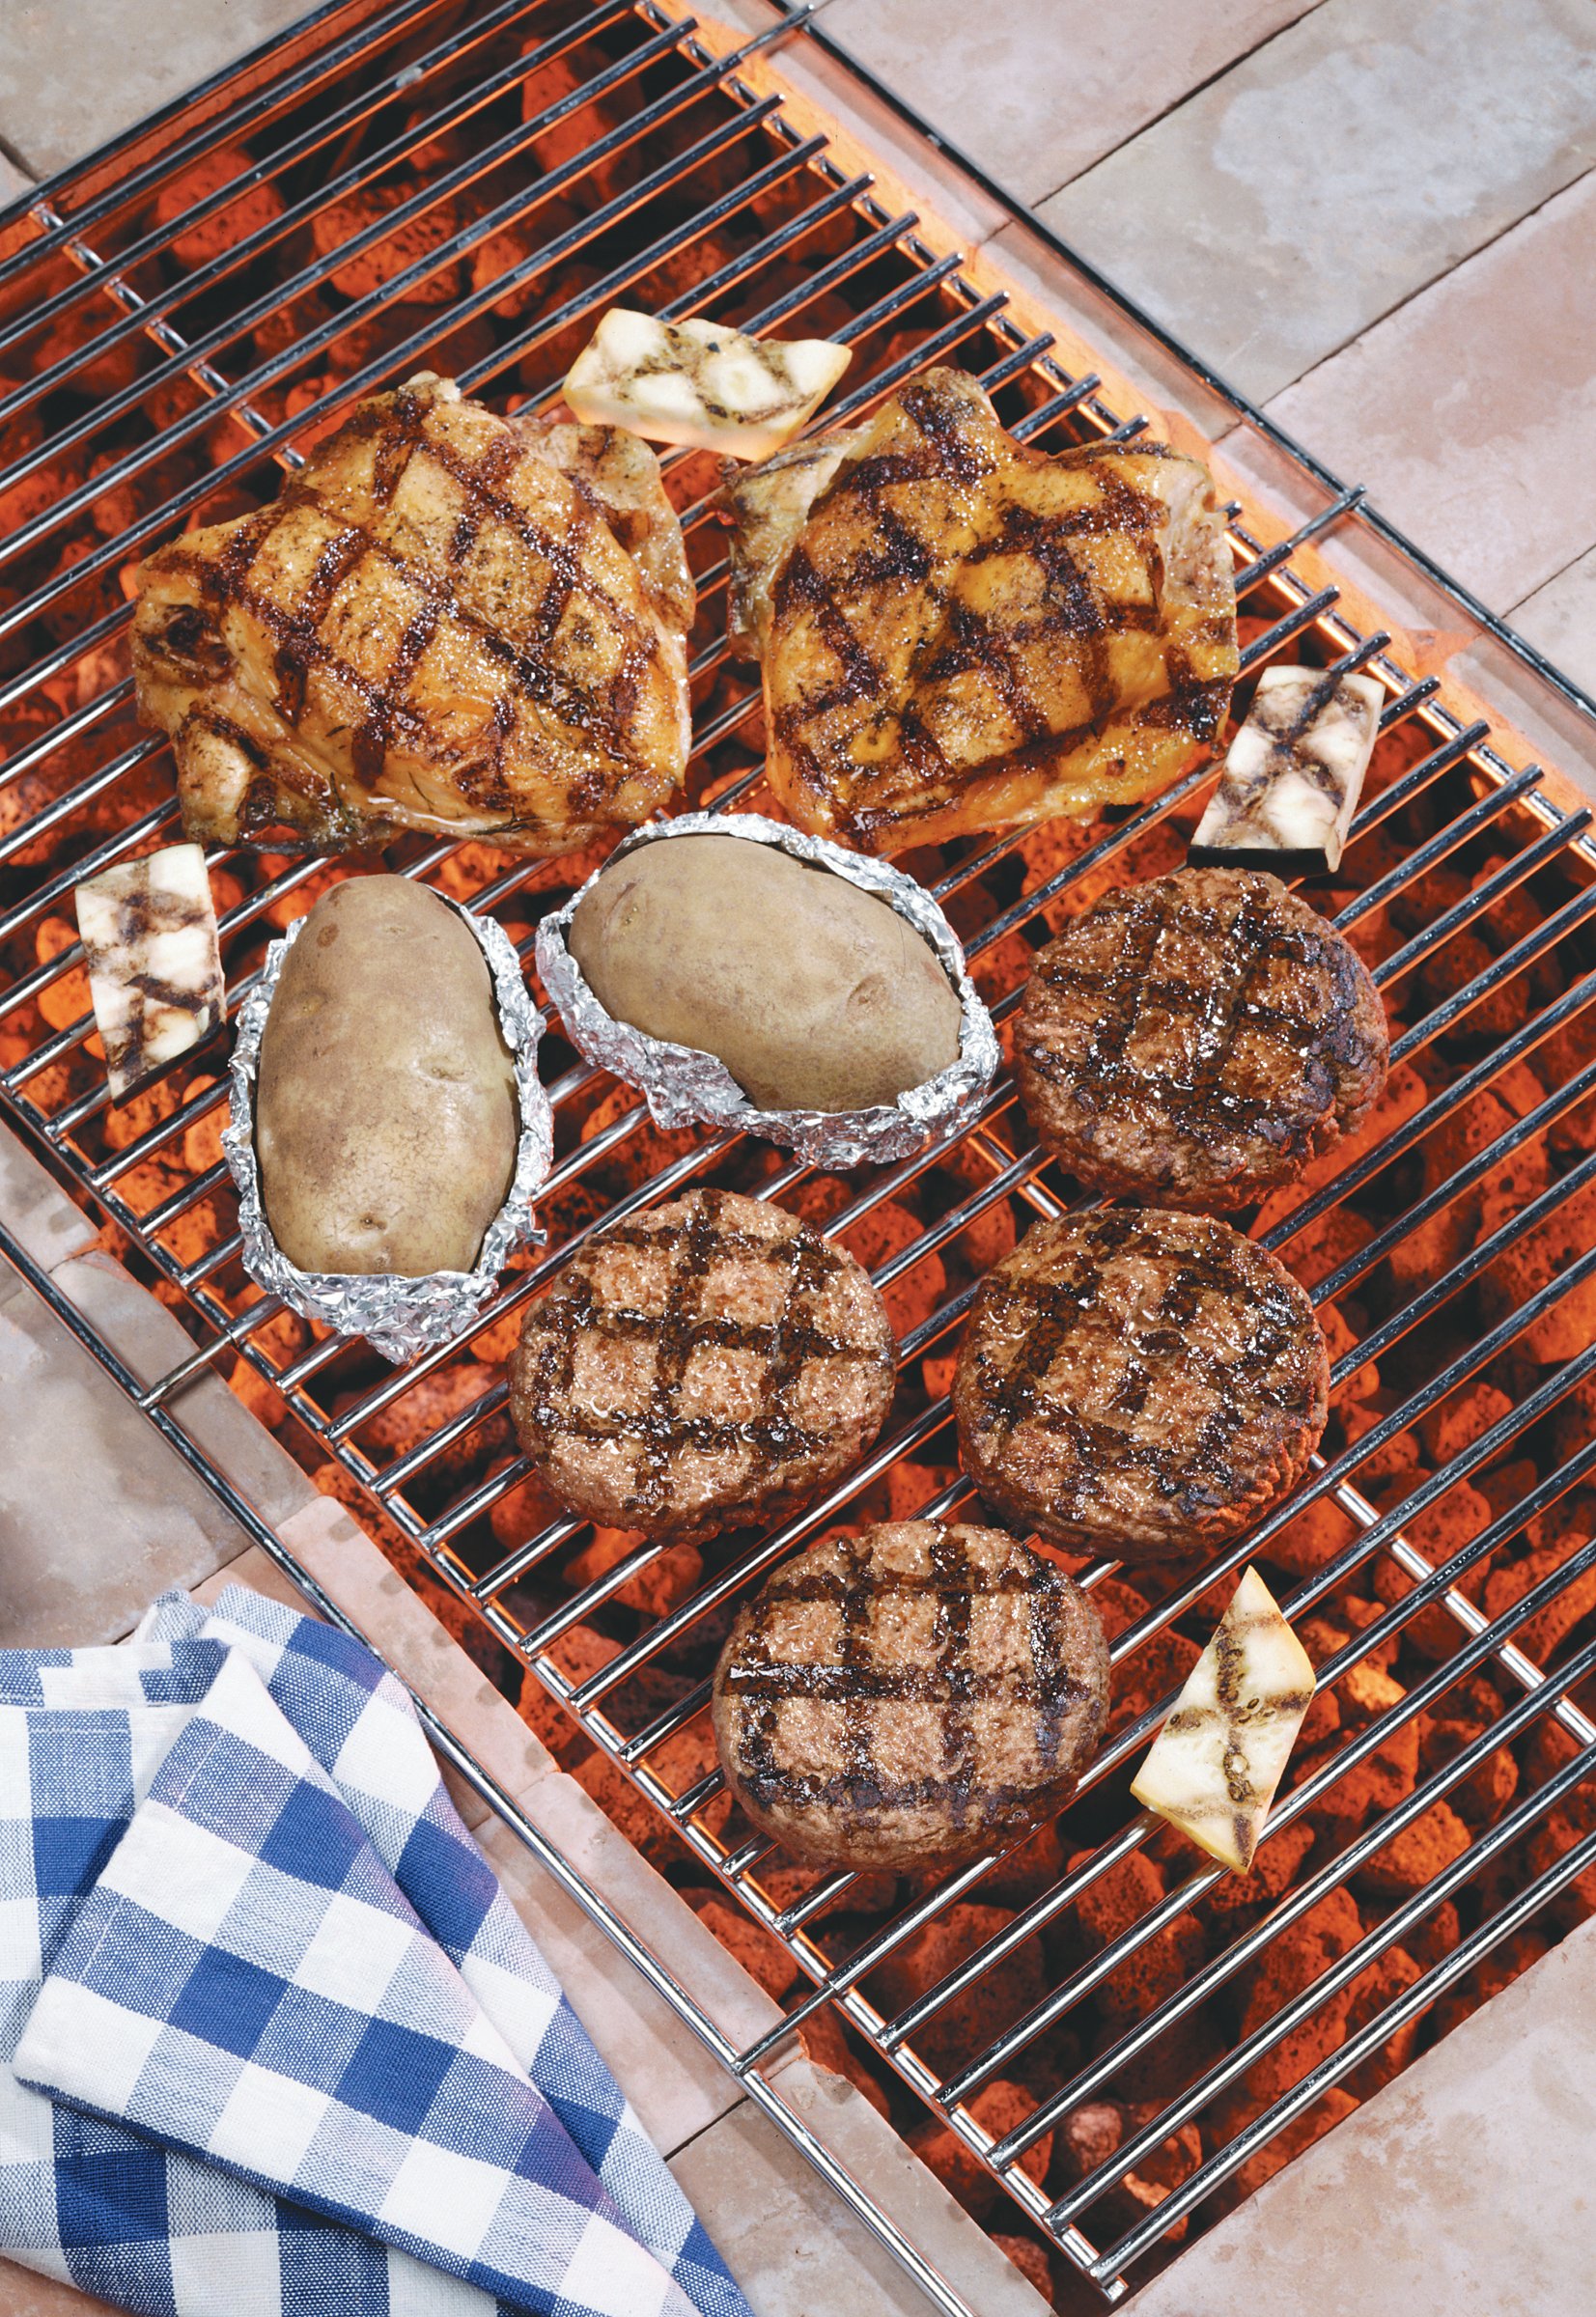 Grilled Chicken and Burgers Food Picture